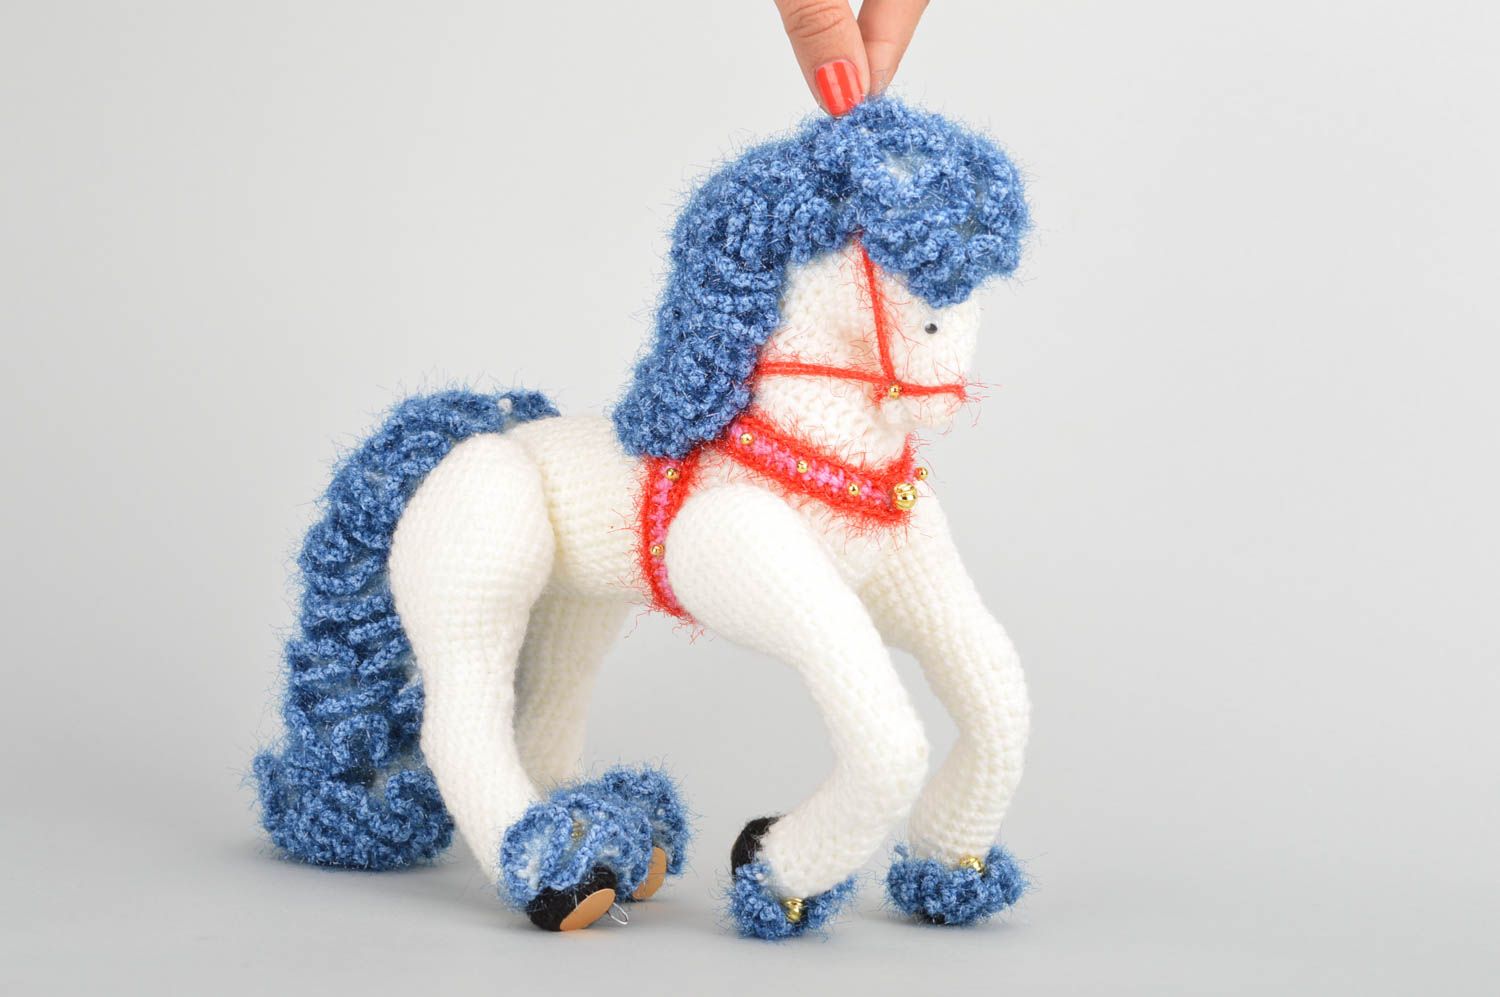 Decorative soft crocheted toy horse handmade beautiful for home interior photo 3